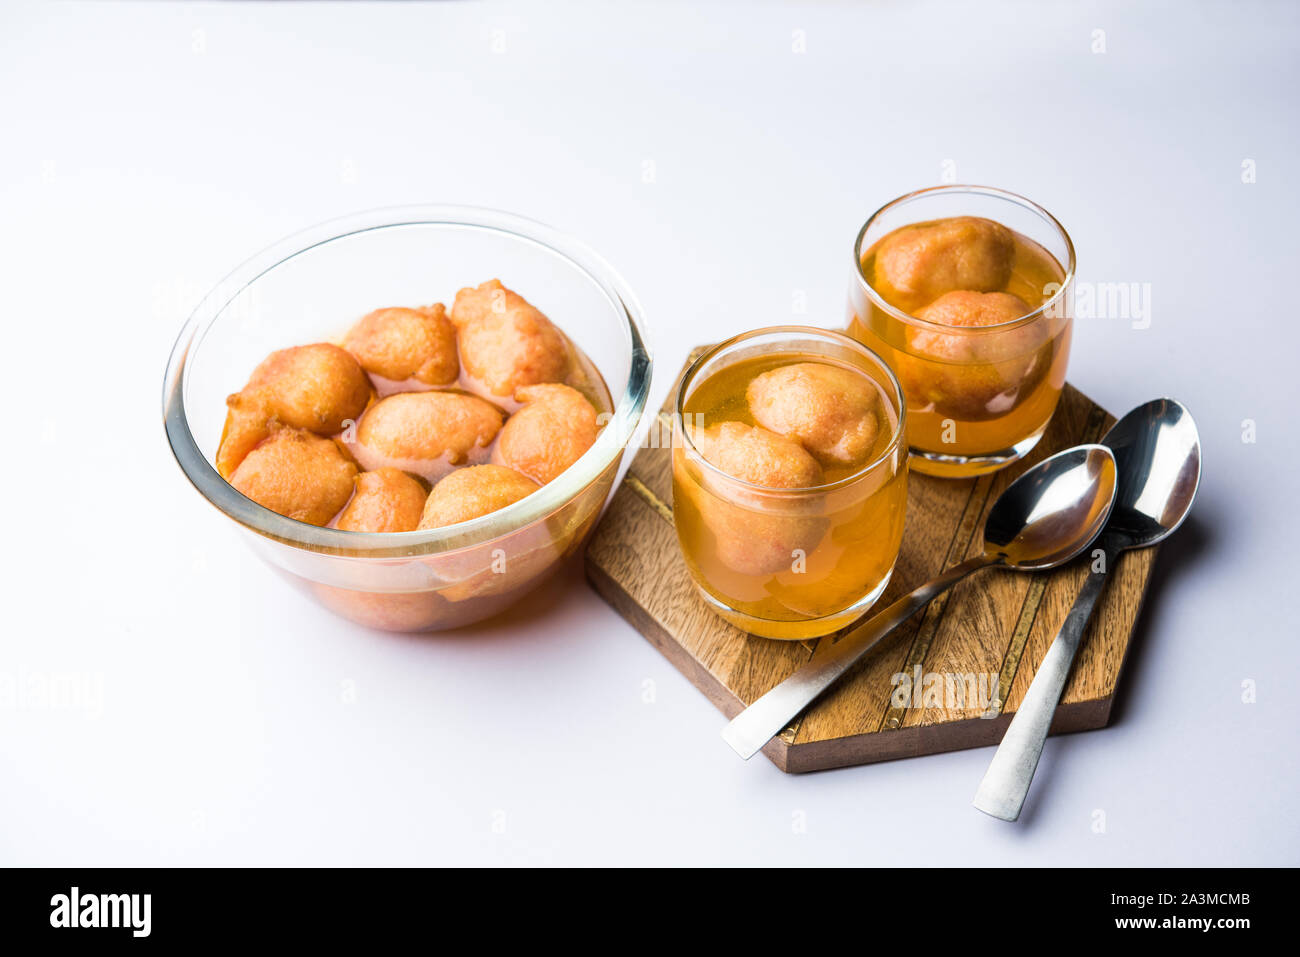 Kanji Vada / wada is a popular Rajasthani detoxifying dish consumed after over eating of sweets in Indian festival season. served in transparent Bowl Stock Photo